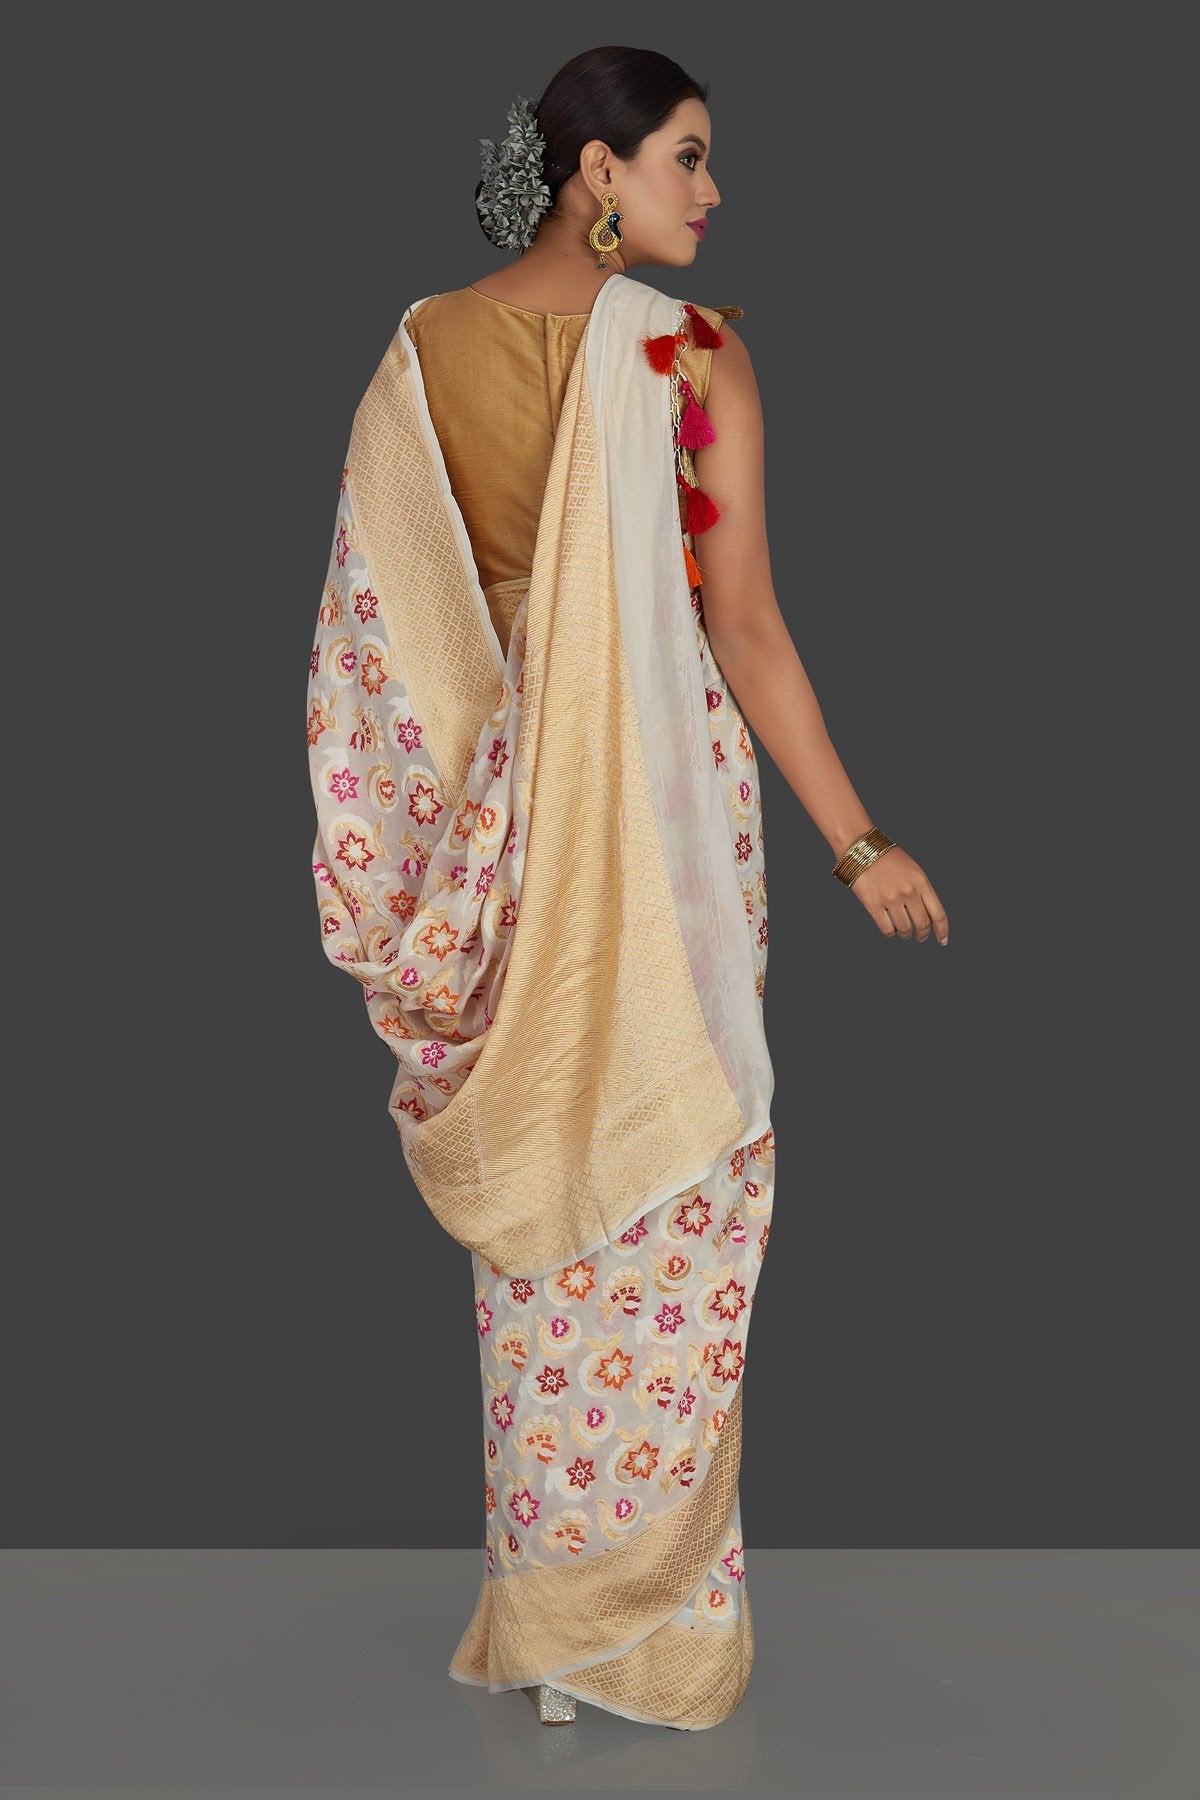 Buy beautiful cream georgette Banarasi sari online in USA with zari minakari floral work. Radiate elegance with georgette sarees, Banarasi sarees, handwoven sarees from Pure Elegance Indian fashion boutique in USA. We bring a especially curated collection of ethnic sarees for Indian women in USA under one roof!-back